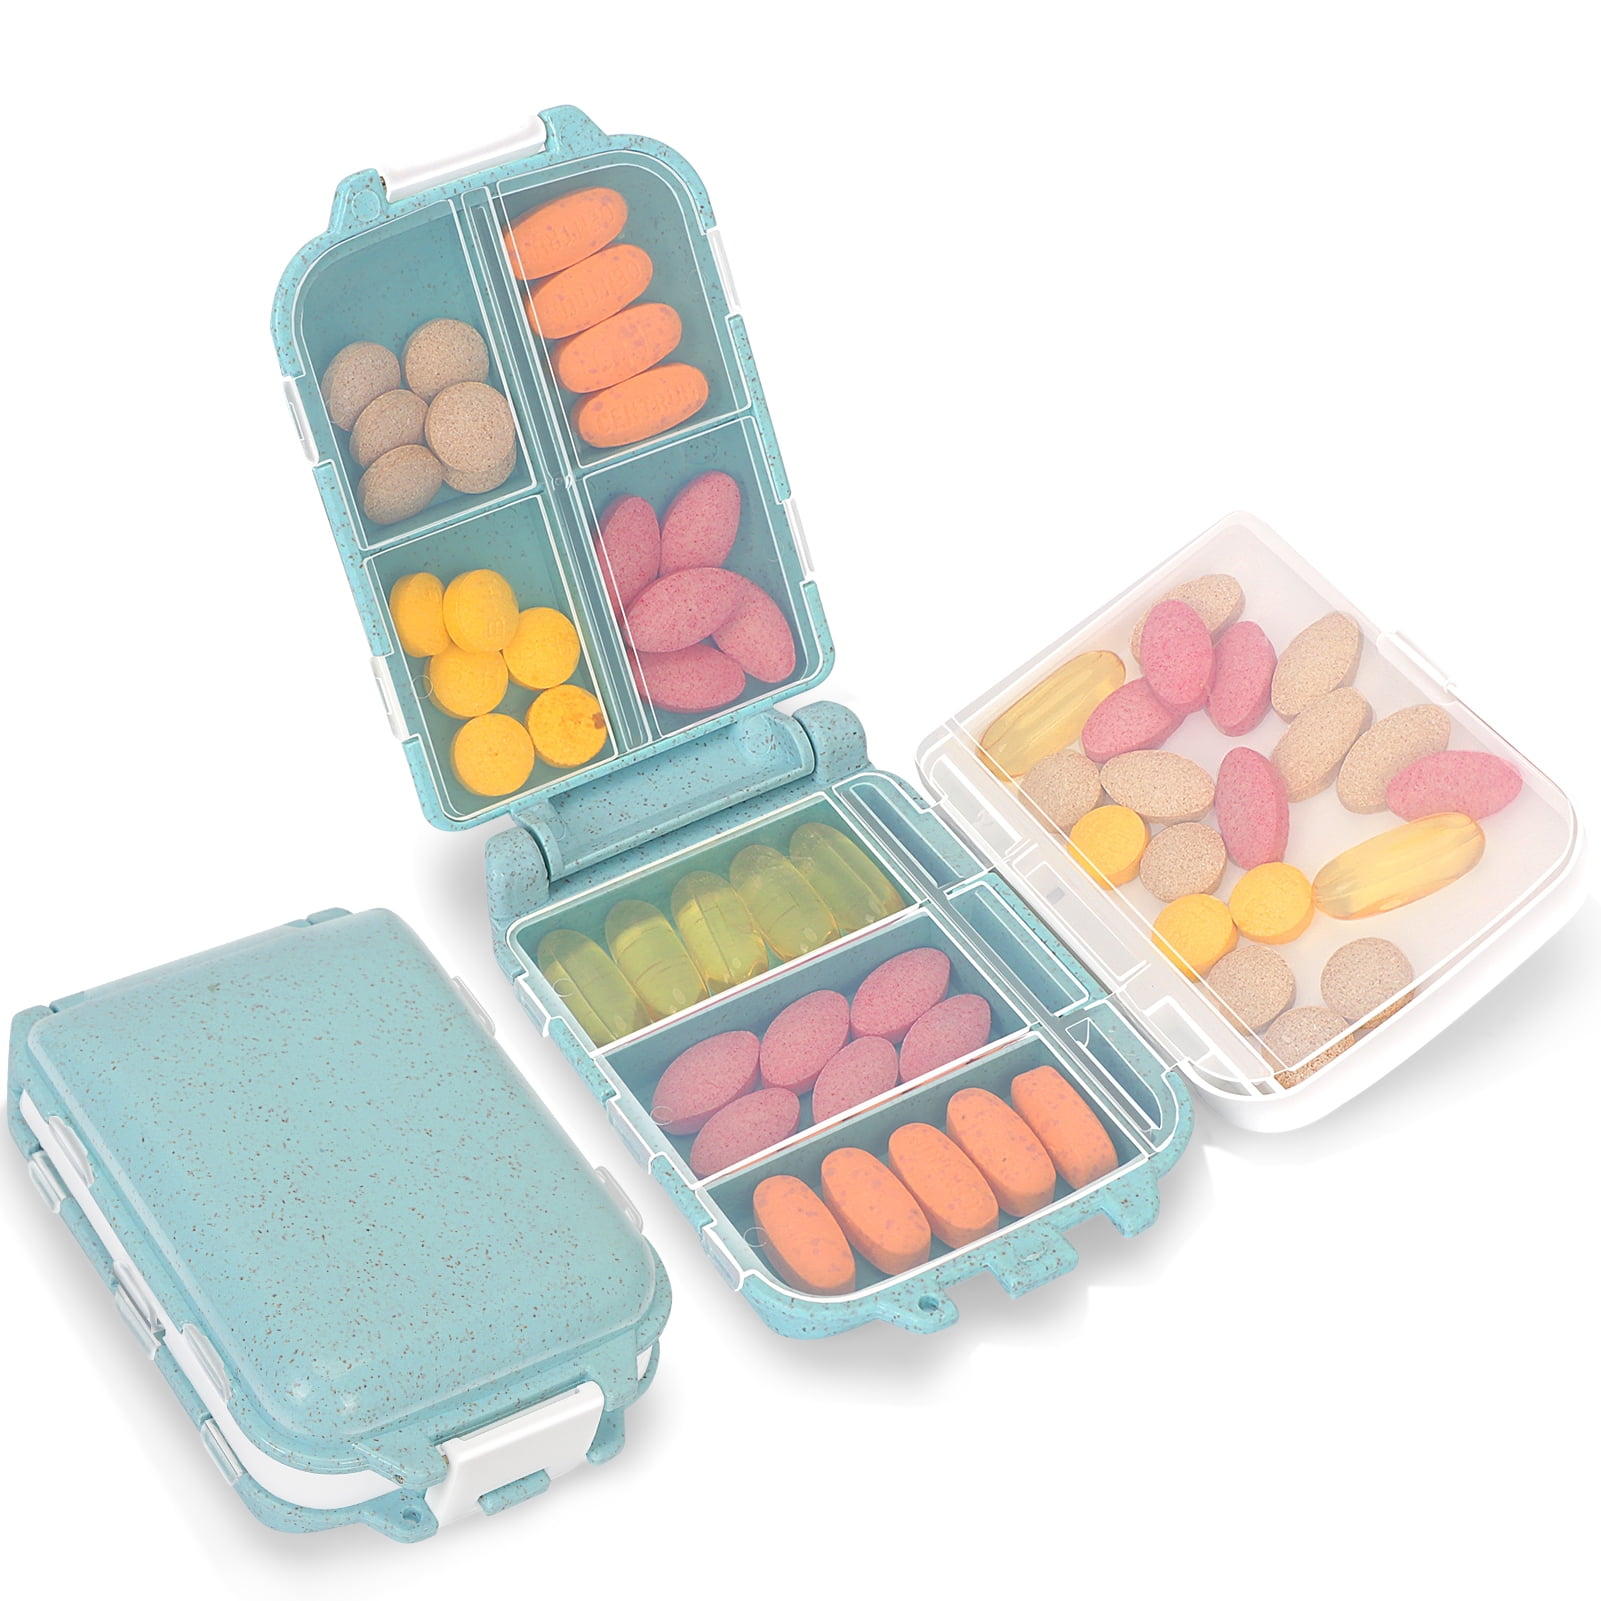 2pcs Travel Pill Organizer, Portable Pill Case, Pill Box Dispenser, with 10 Compartments for Different Medicines